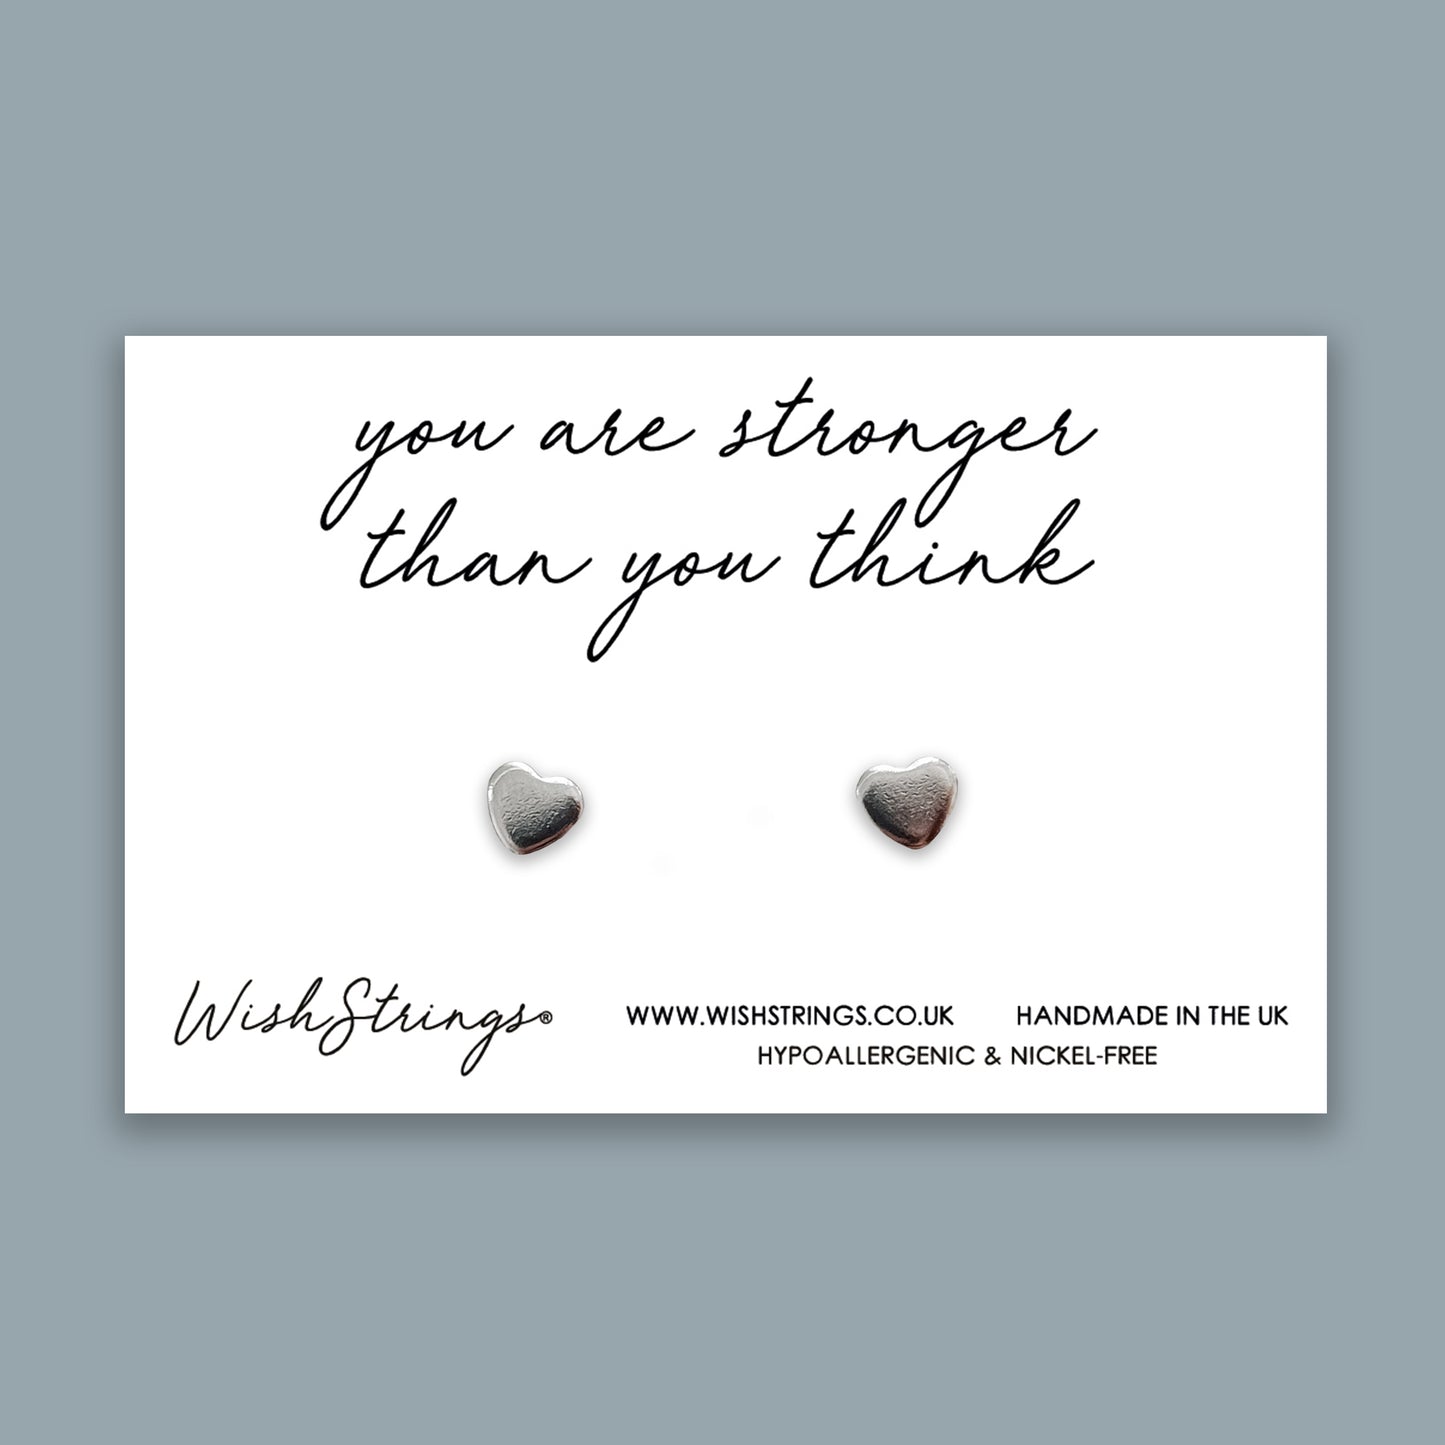 Stronger than you Think - Silver Heart Stud Earrings | 304 Stainless - Hypoallergenic